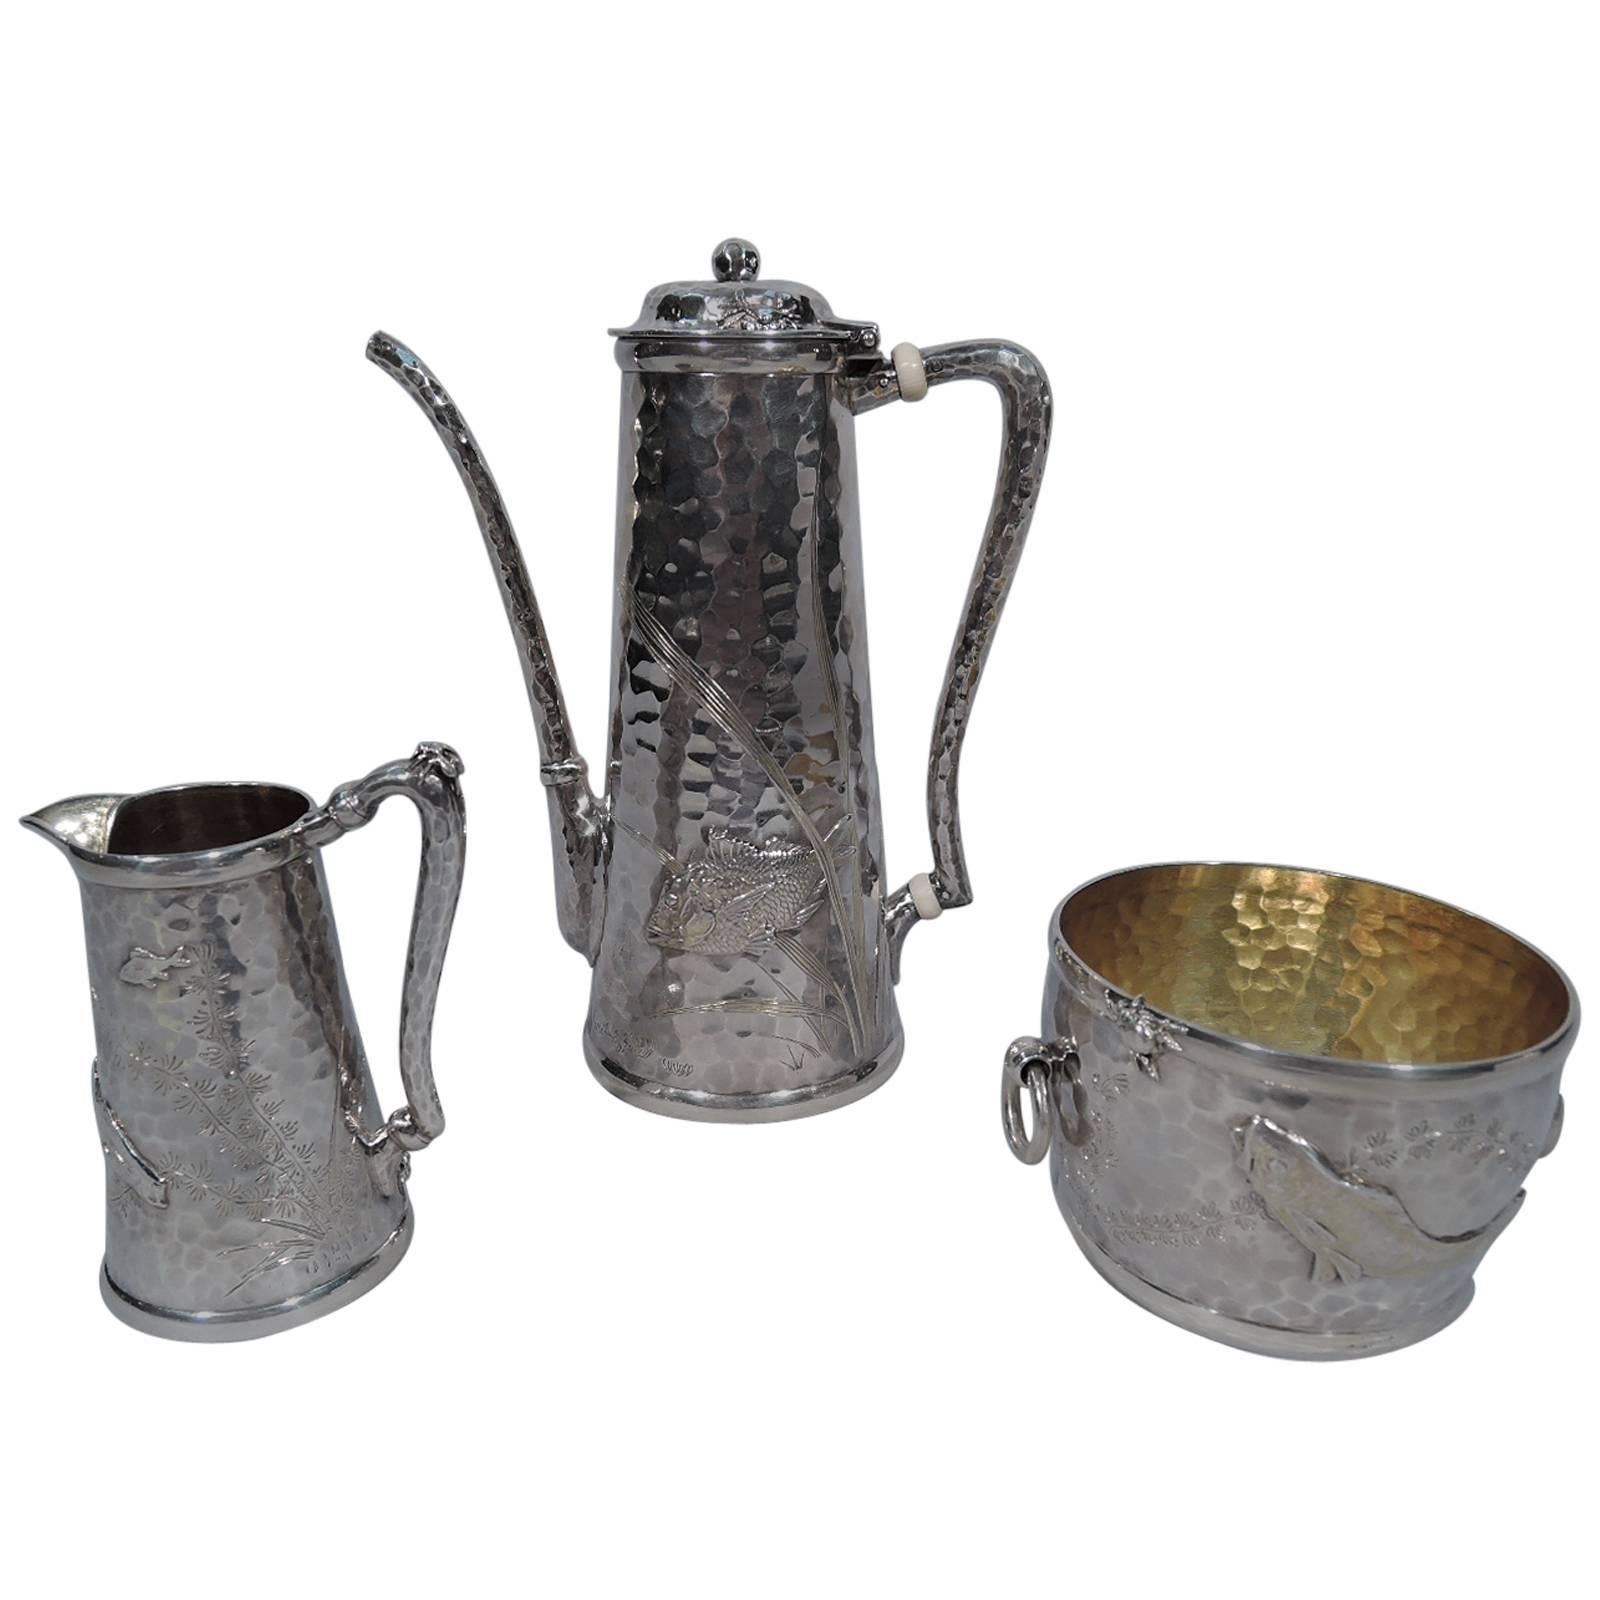 Finest Tiffany Japonesque Hand-Hammered and Applied Silver Coffee Set